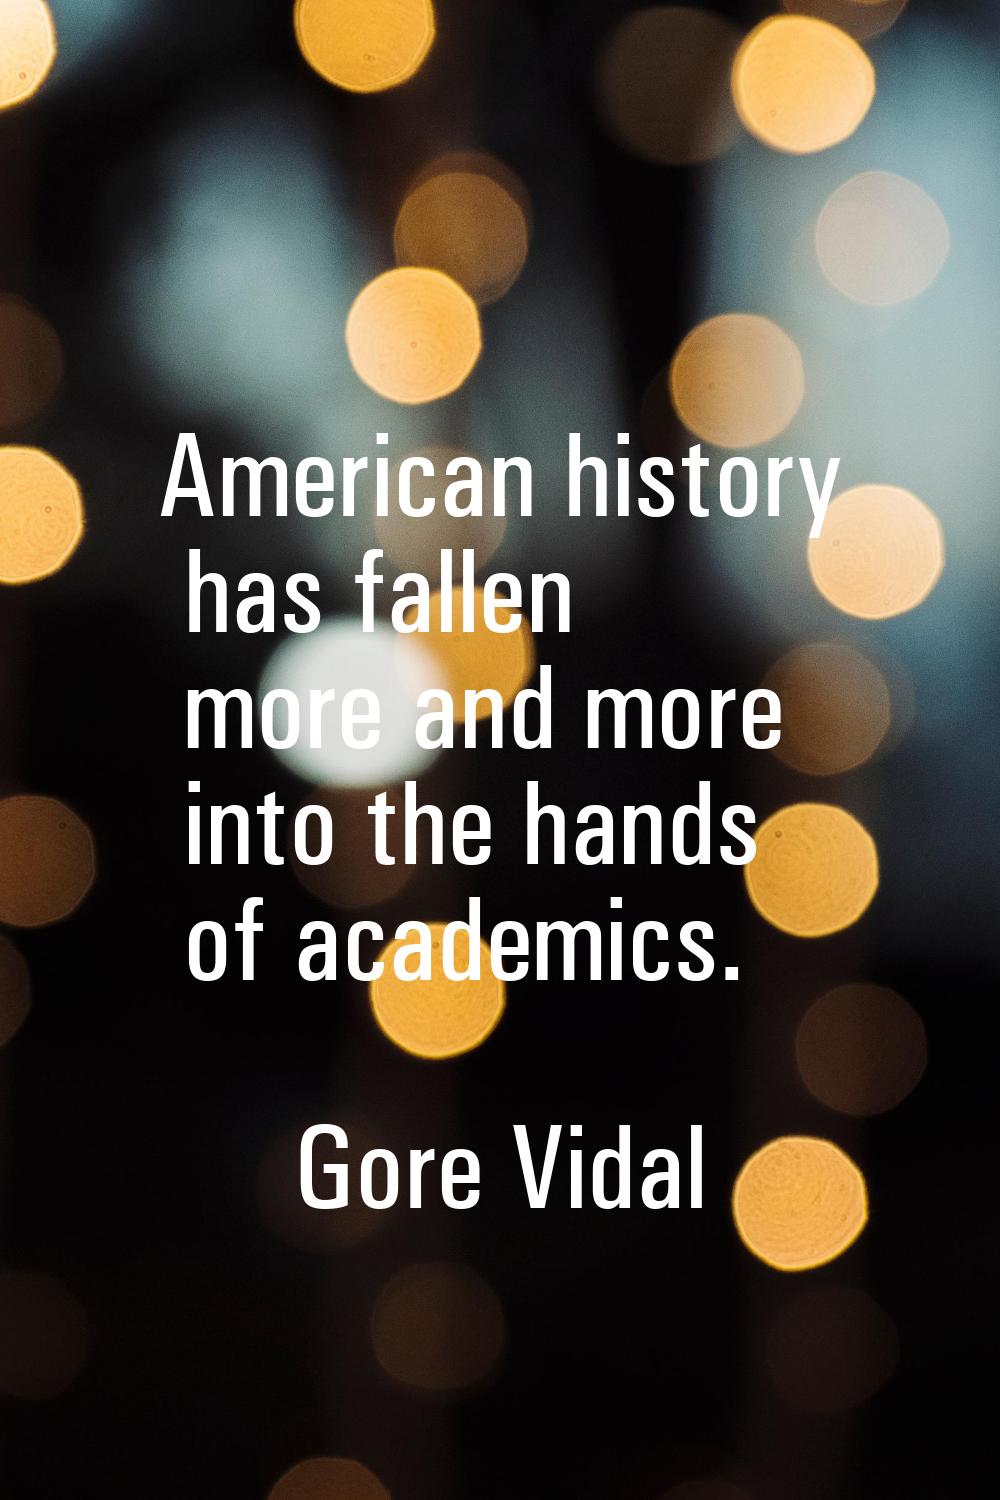 American history has fallen more and more into the hands of academics.